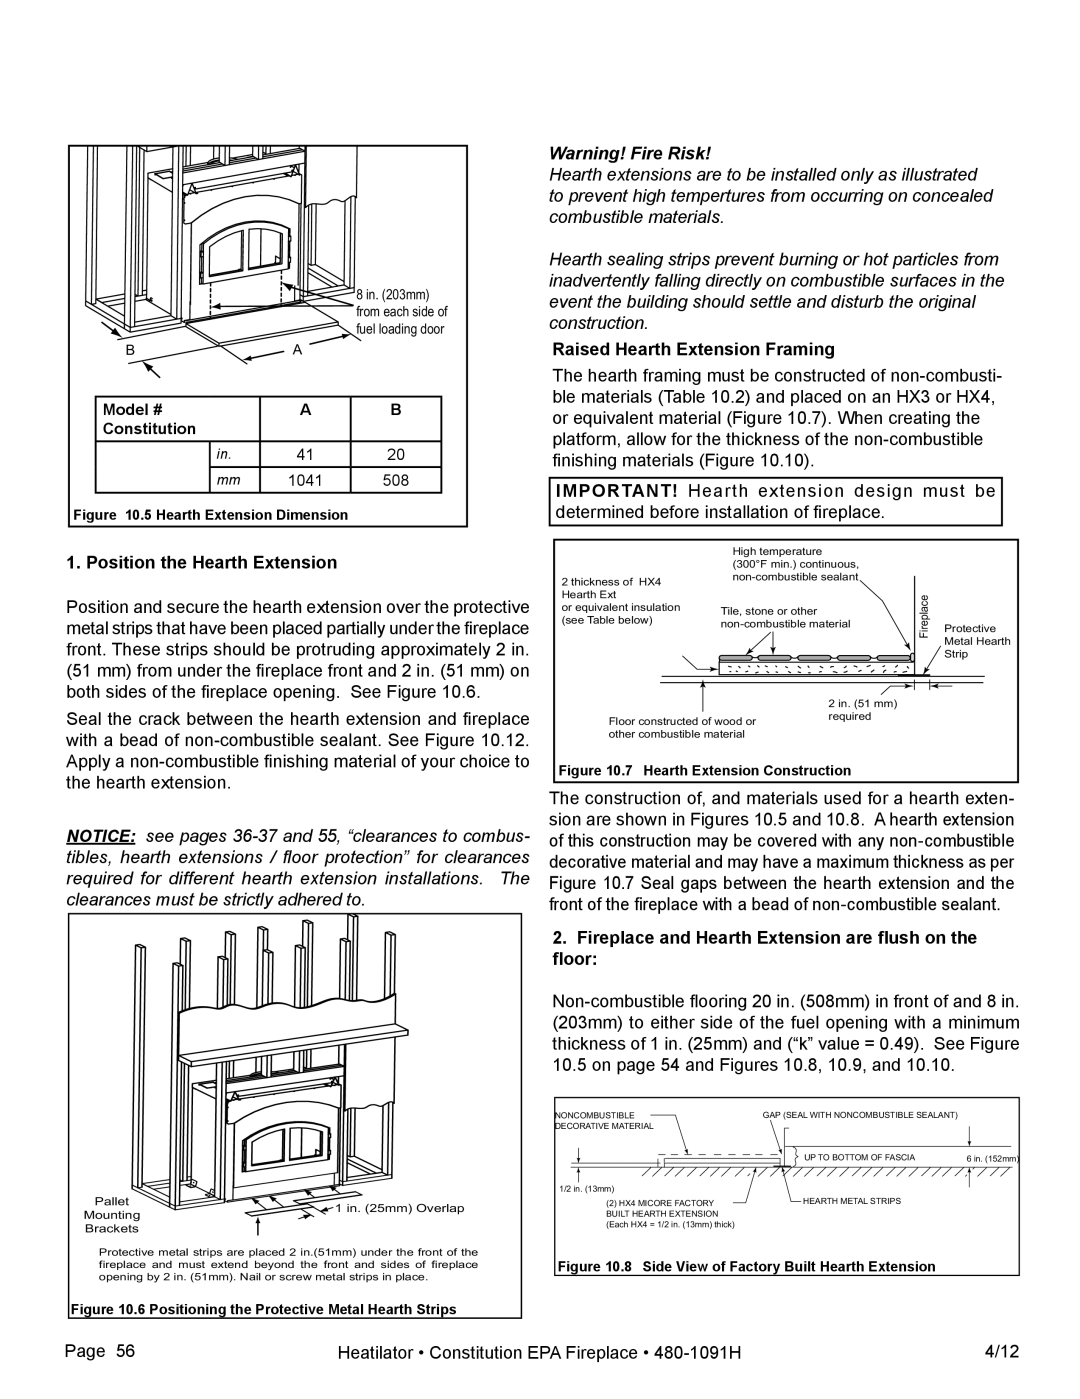 Heatiator C40 owner manual Position the Hearth Extension, Warning! Fire Risk, Raised Hearth Extension Framing 